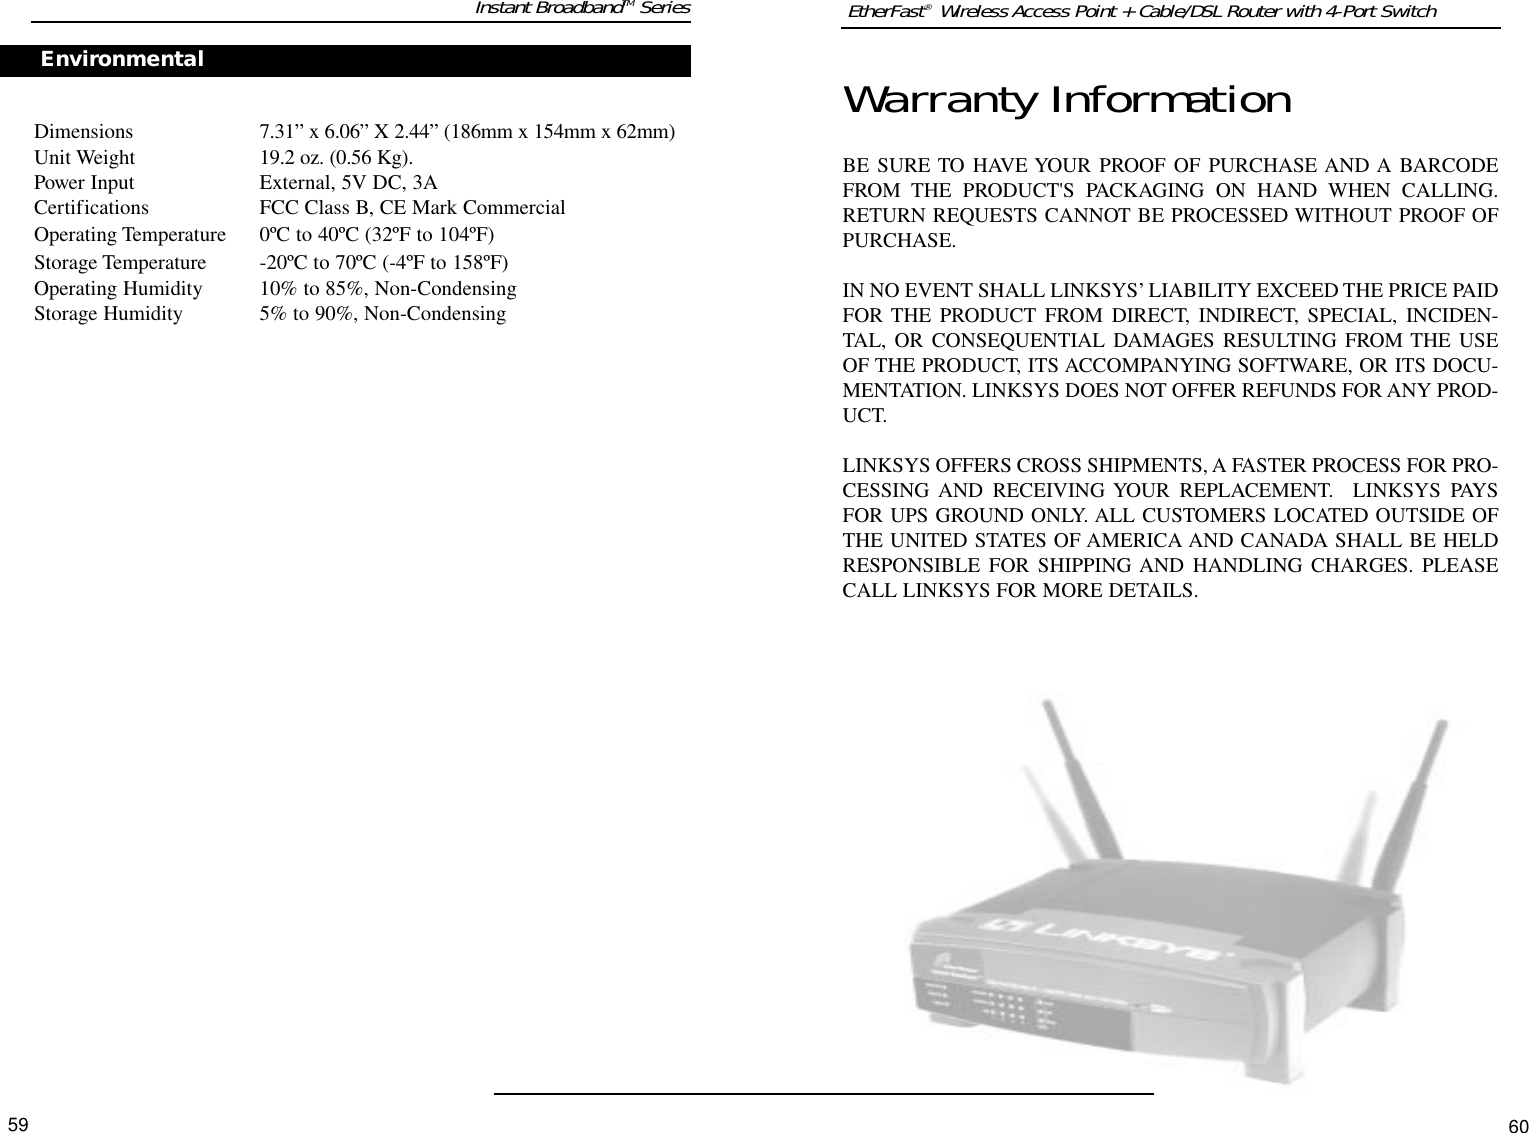 EtherFast®  Wireless Access Point + Cable/DSL Router with 4-Port Switch60Warranty InformationBE SURE TO HAVE YOUR PROOF OF PURCHASE AND A BARCODEFROM THE PRODUCT&apos;S PACKAGING ON HAND WHEN CALLING.RETURN REQUESTS CANNOT BE PROCESSED WITHOUT PROOF OFPURCHASE. IN NO EVENT SHALL LINKSYS’ LIABILITY EXCEED THE PRICE PAIDFOR THE PRODUCT FROM DIRECT, INDIRECT, SPECIAL, INCIDEN-TAL, OR CONSEQUENTIAL DAMAGES RESULTING FROM THE USEOF THE PRODUCT, ITS ACCOMPANYING SOFTWARE, OR ITS DOCU-MENTATION. LINKSYS DOES NOT OFFER REFUNDS FOR ANY PROD-UCT. LINKSYS OFFERS CROSS SHIPMENTS, A FASTER PROCESS FOR PRO-CESSING AND RECEIVING YOUR REPLACEMENT.  LINKSYS PAYSFOR UPS GROUND ONLY. ALL CUSTOMERS LOCATED OUTSIDE OFTHE UNITED STATES OF AMERICA AND CANADA SHALL BE HELDRESPONSIBLE FOR SHIPPING AND HANDLING CHARGES. PLEASECALL LINKSYS FOR MORE DETAILS.59Instant BroadbandTM SeriesConnectors 2 Antenna ConnectorsEnvironmentalDimensions 7.31” x 6.06” X 2.44” (186mm x 154mm x 62mm)Unit Weight 19.2 oz. (0.56 Kg).Power Input External, 5V DC, 3ACertifications FCC Class B, CE Mark CommercialOperating Temperature 0ºC to 40ºC (32ºF to 104ºF)Storage Temperature -20ºC to 70ºC (-4ºF to 158ºF)Operating Humidity 10% to 85%, Non-CondensingStorage Humidity 5% to 90%, Non-CondensingCustomerSupportEnvironmental